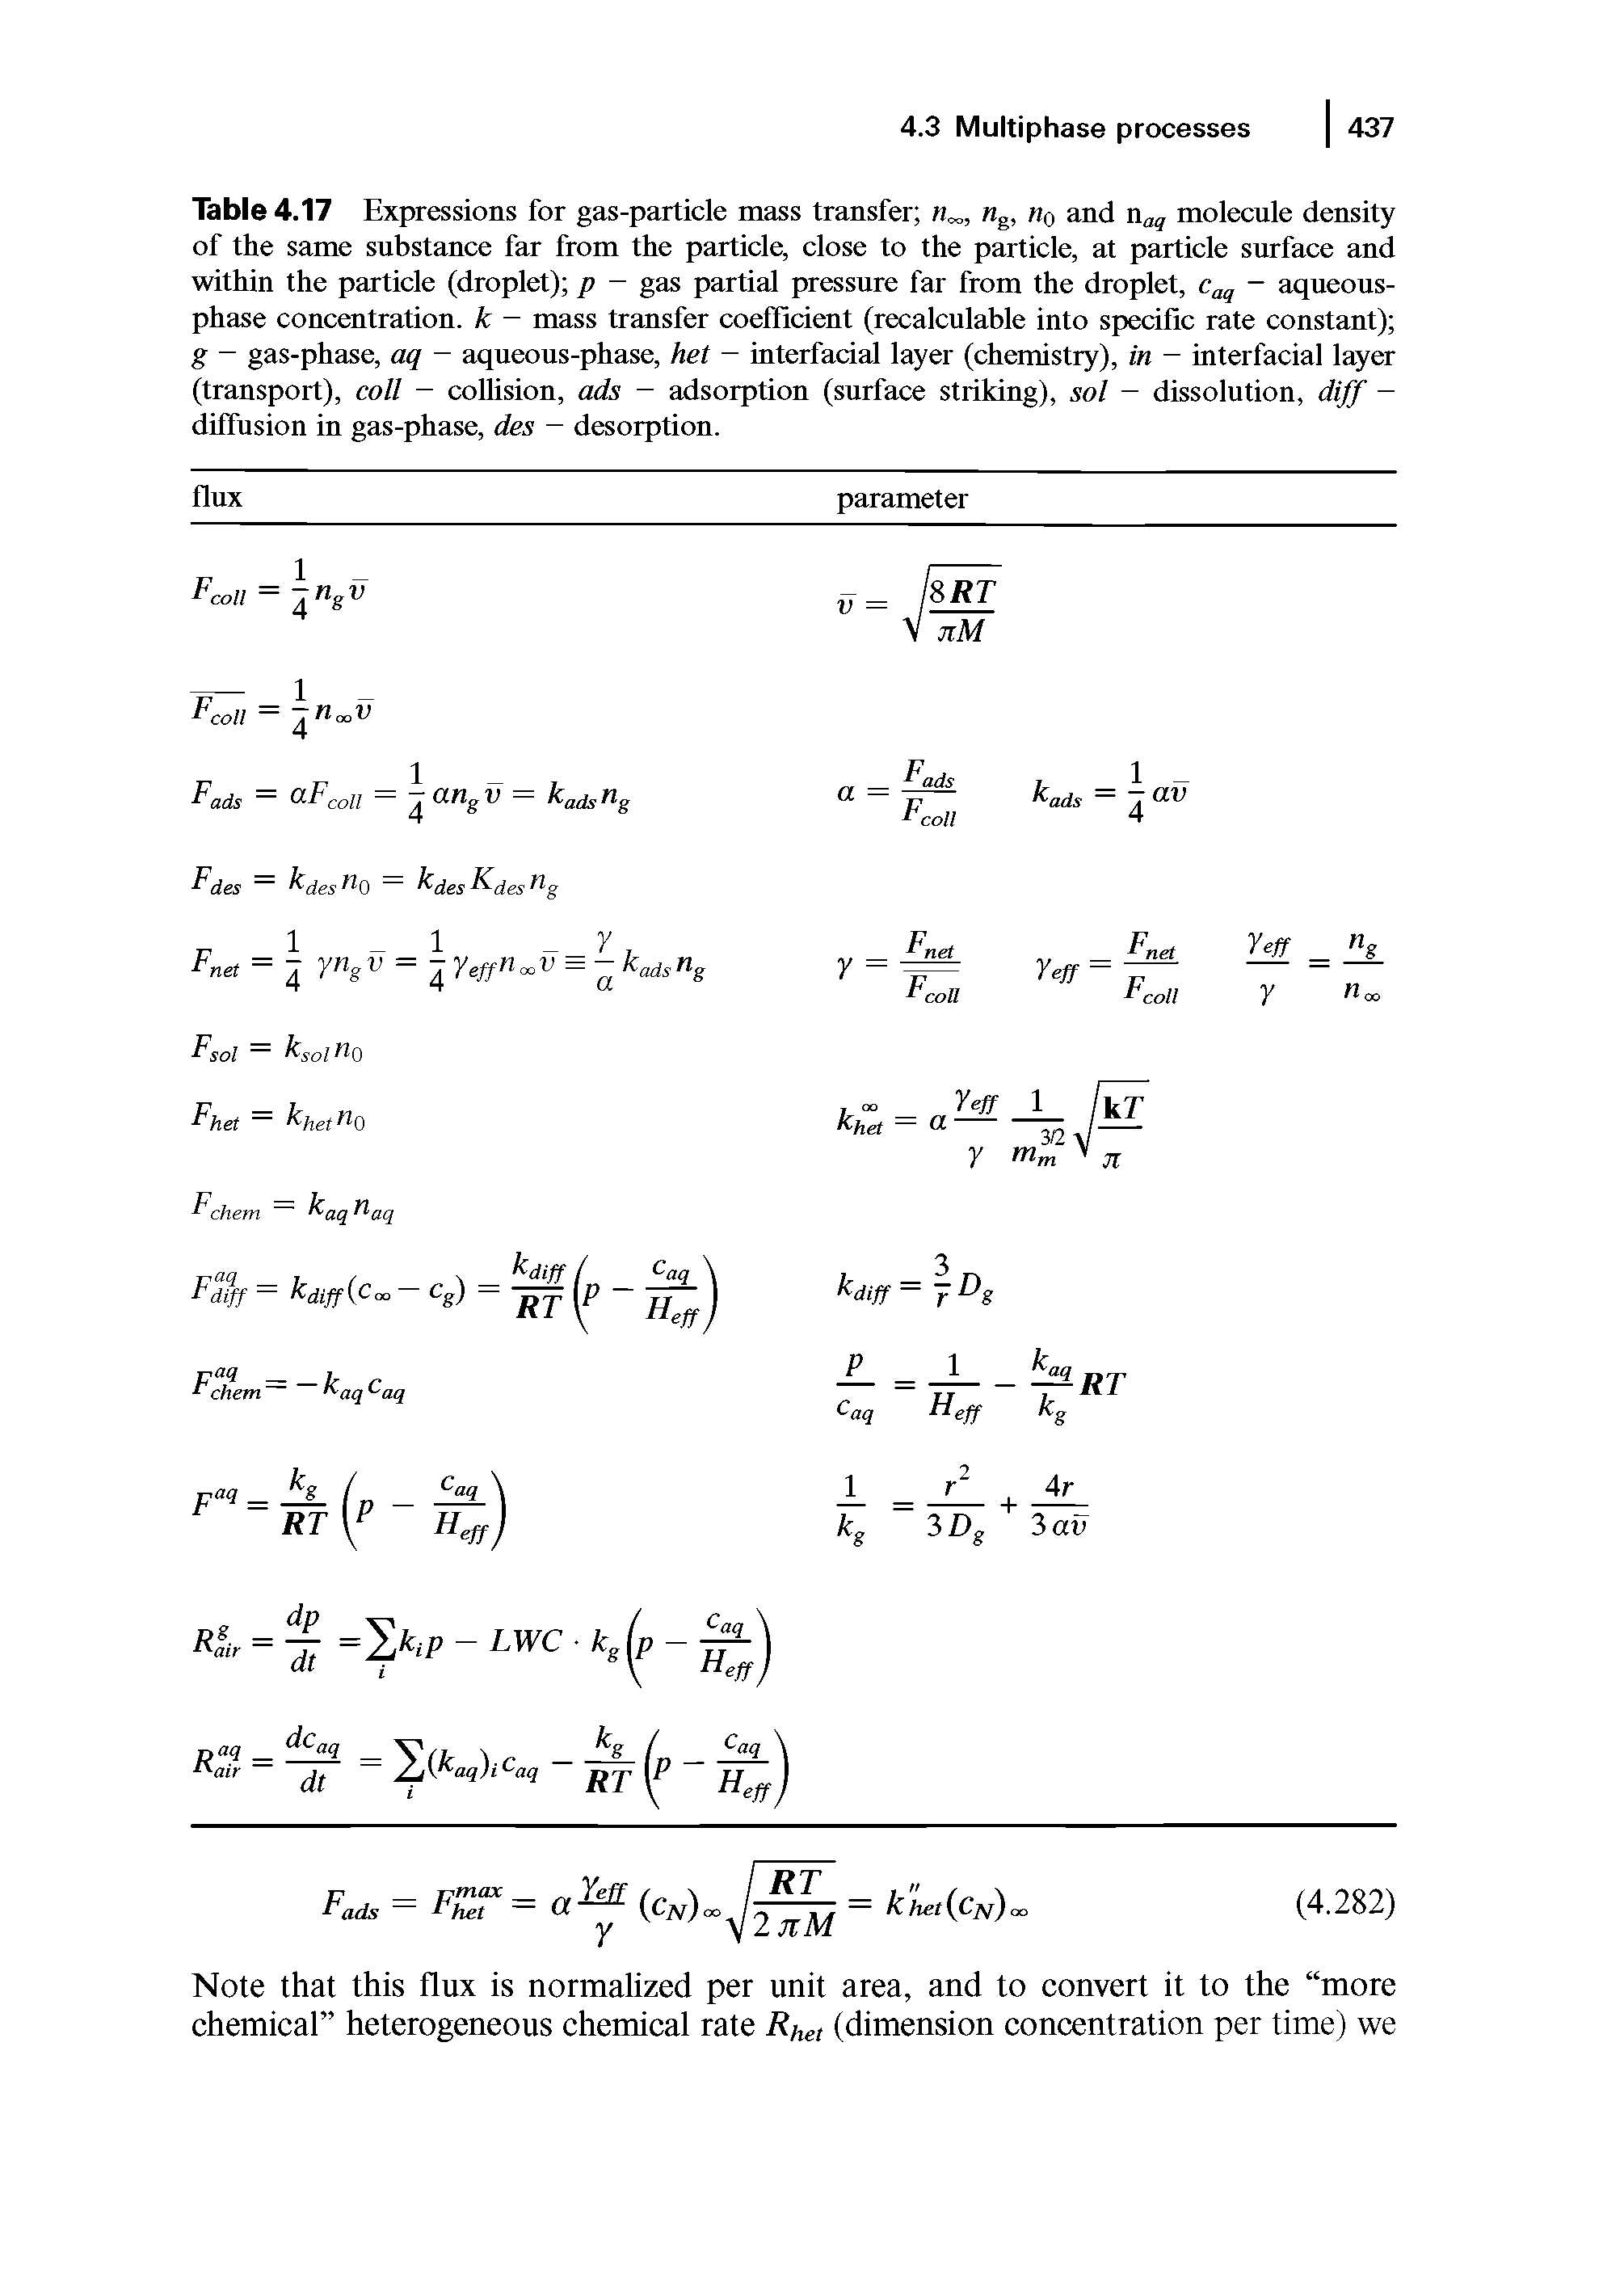 Table 4.17 Expressions for gas-particle mass transfer n , g, Mq and Haq molecule density of the same substance far from the particle, close to the particle, at particle surface and within the particle (droplet) p — gas partial pressure far from the droplet, c g - aqueous-phase concentration, k - mass transfer coefficient (recalculable into spjecific rate constant) g - gas-phase, aq - aqueous-phase, het - interfadal layer (chemistry), in - interfacial layer (transport), coll - collision, ads — adsorption (surface striking), sol - dissolution, diff -diffusion in gas-phase, des - desorption.